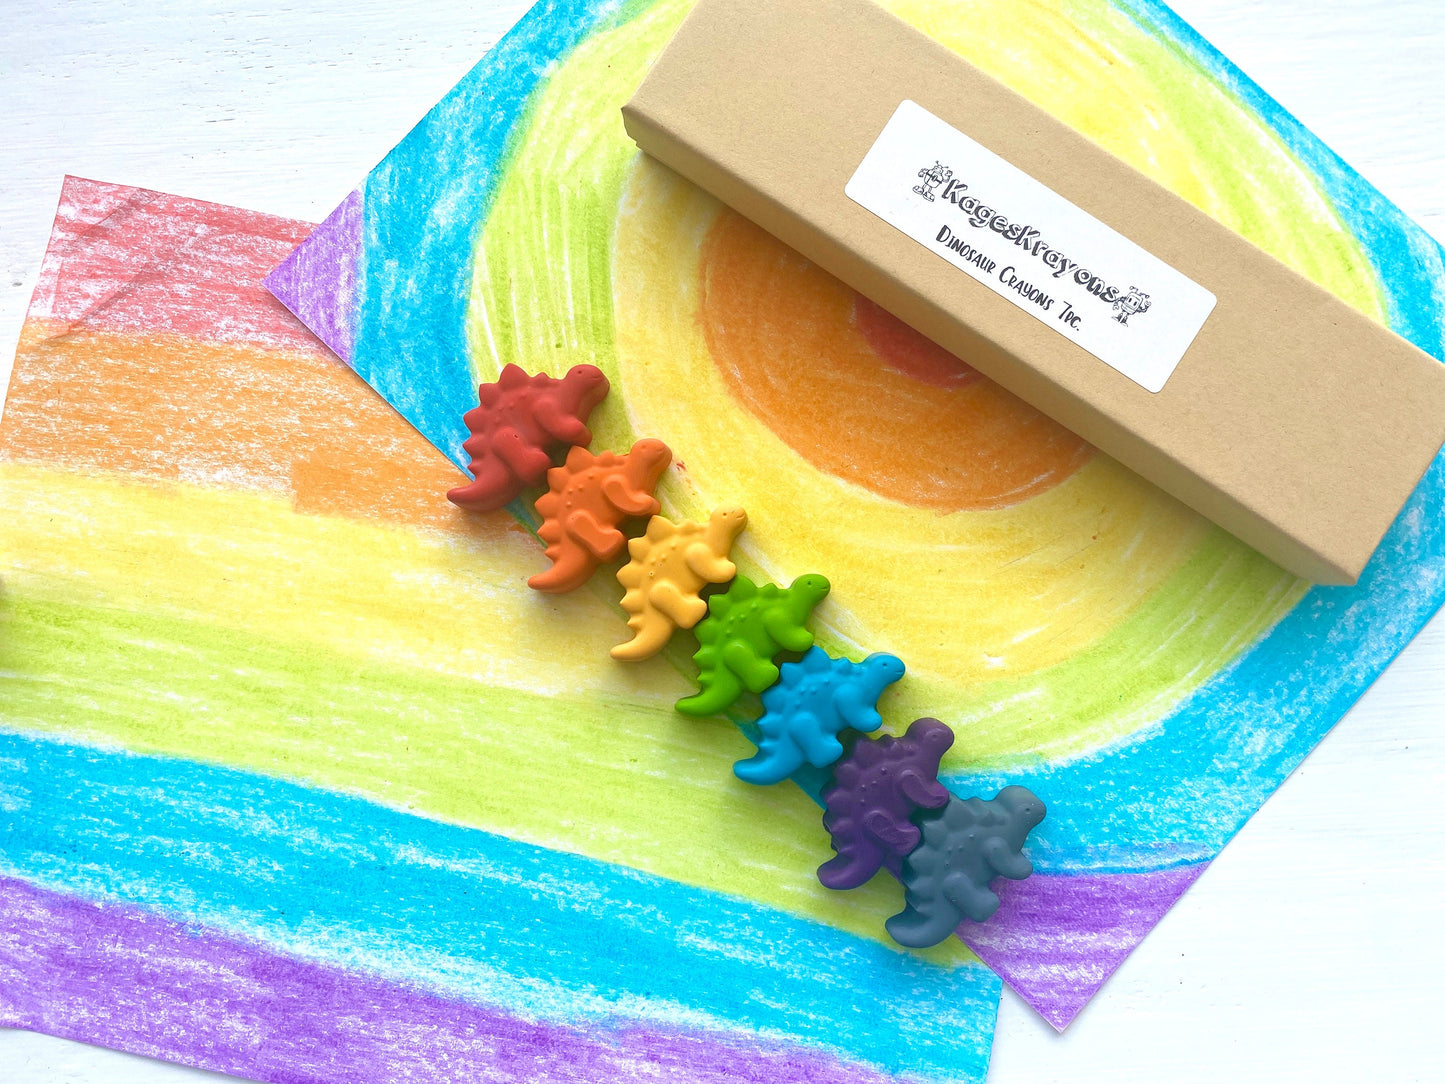 Dinosaur Crayons - Dinosaur Party Favors - Kids Gifts - Stocking Stuffers - Kids Birthday Gifts - Easter Basket Stuffers - Kids Party Favors